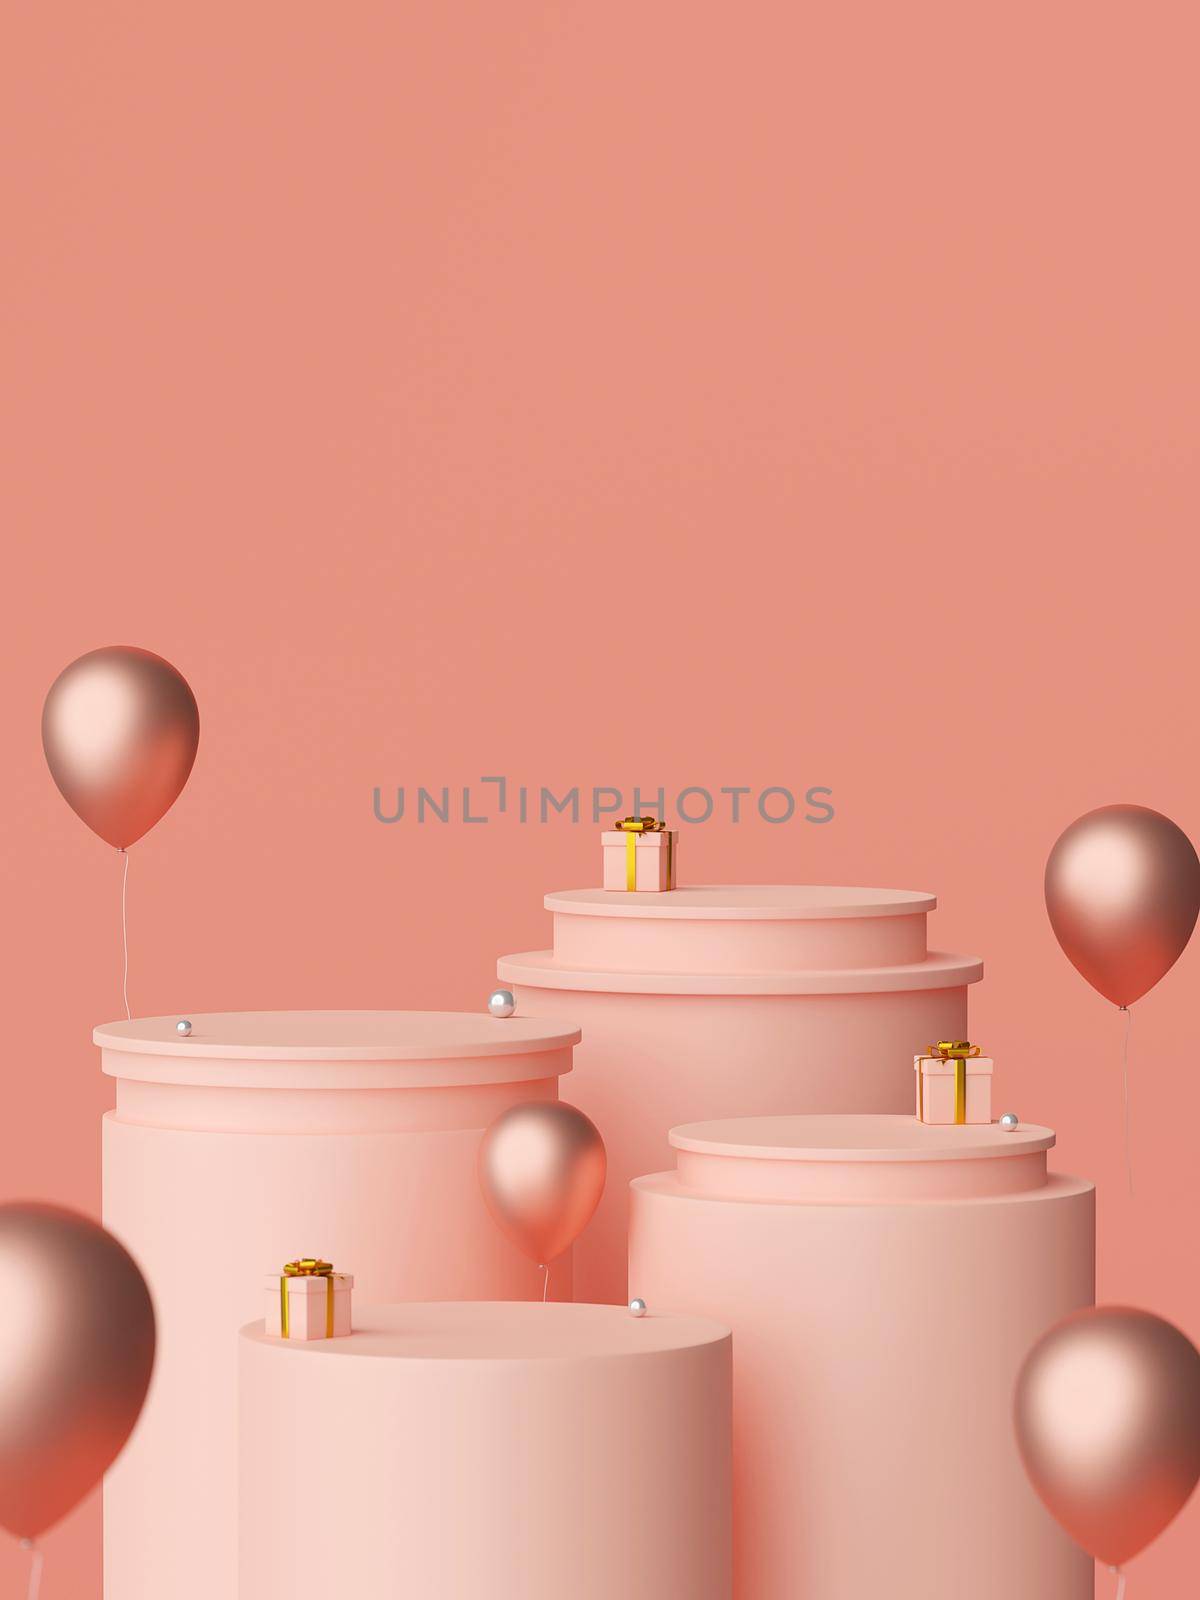 Merry Christmas and Happy New Year, Scene of Christmas podium and gifts with balloon, 3d rendering by nutzchotwarut